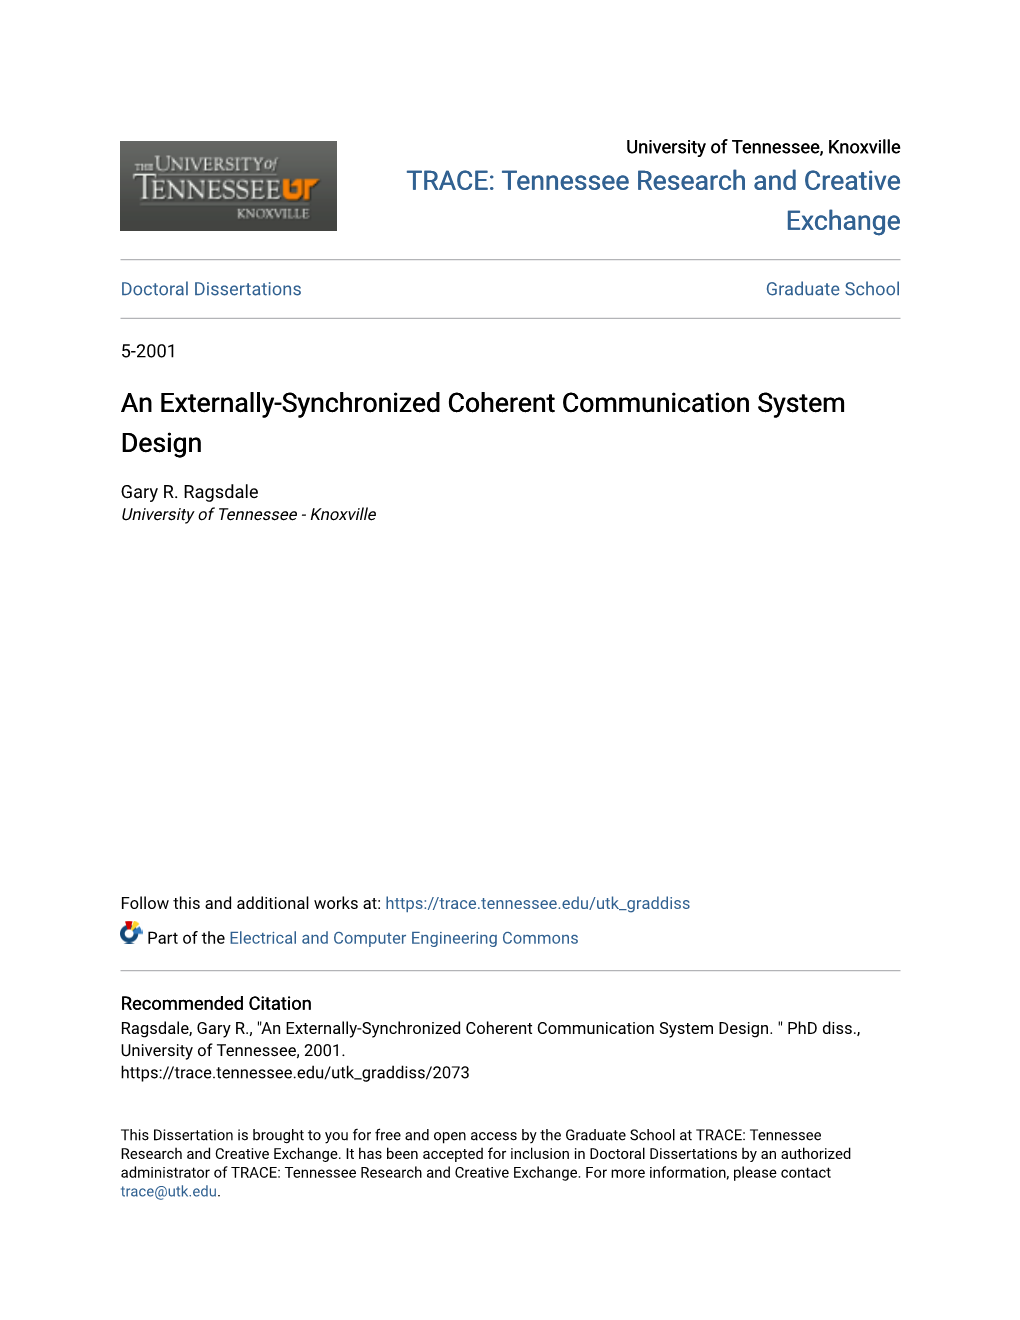 An Externally-Synchronized Coherent Communication System Design